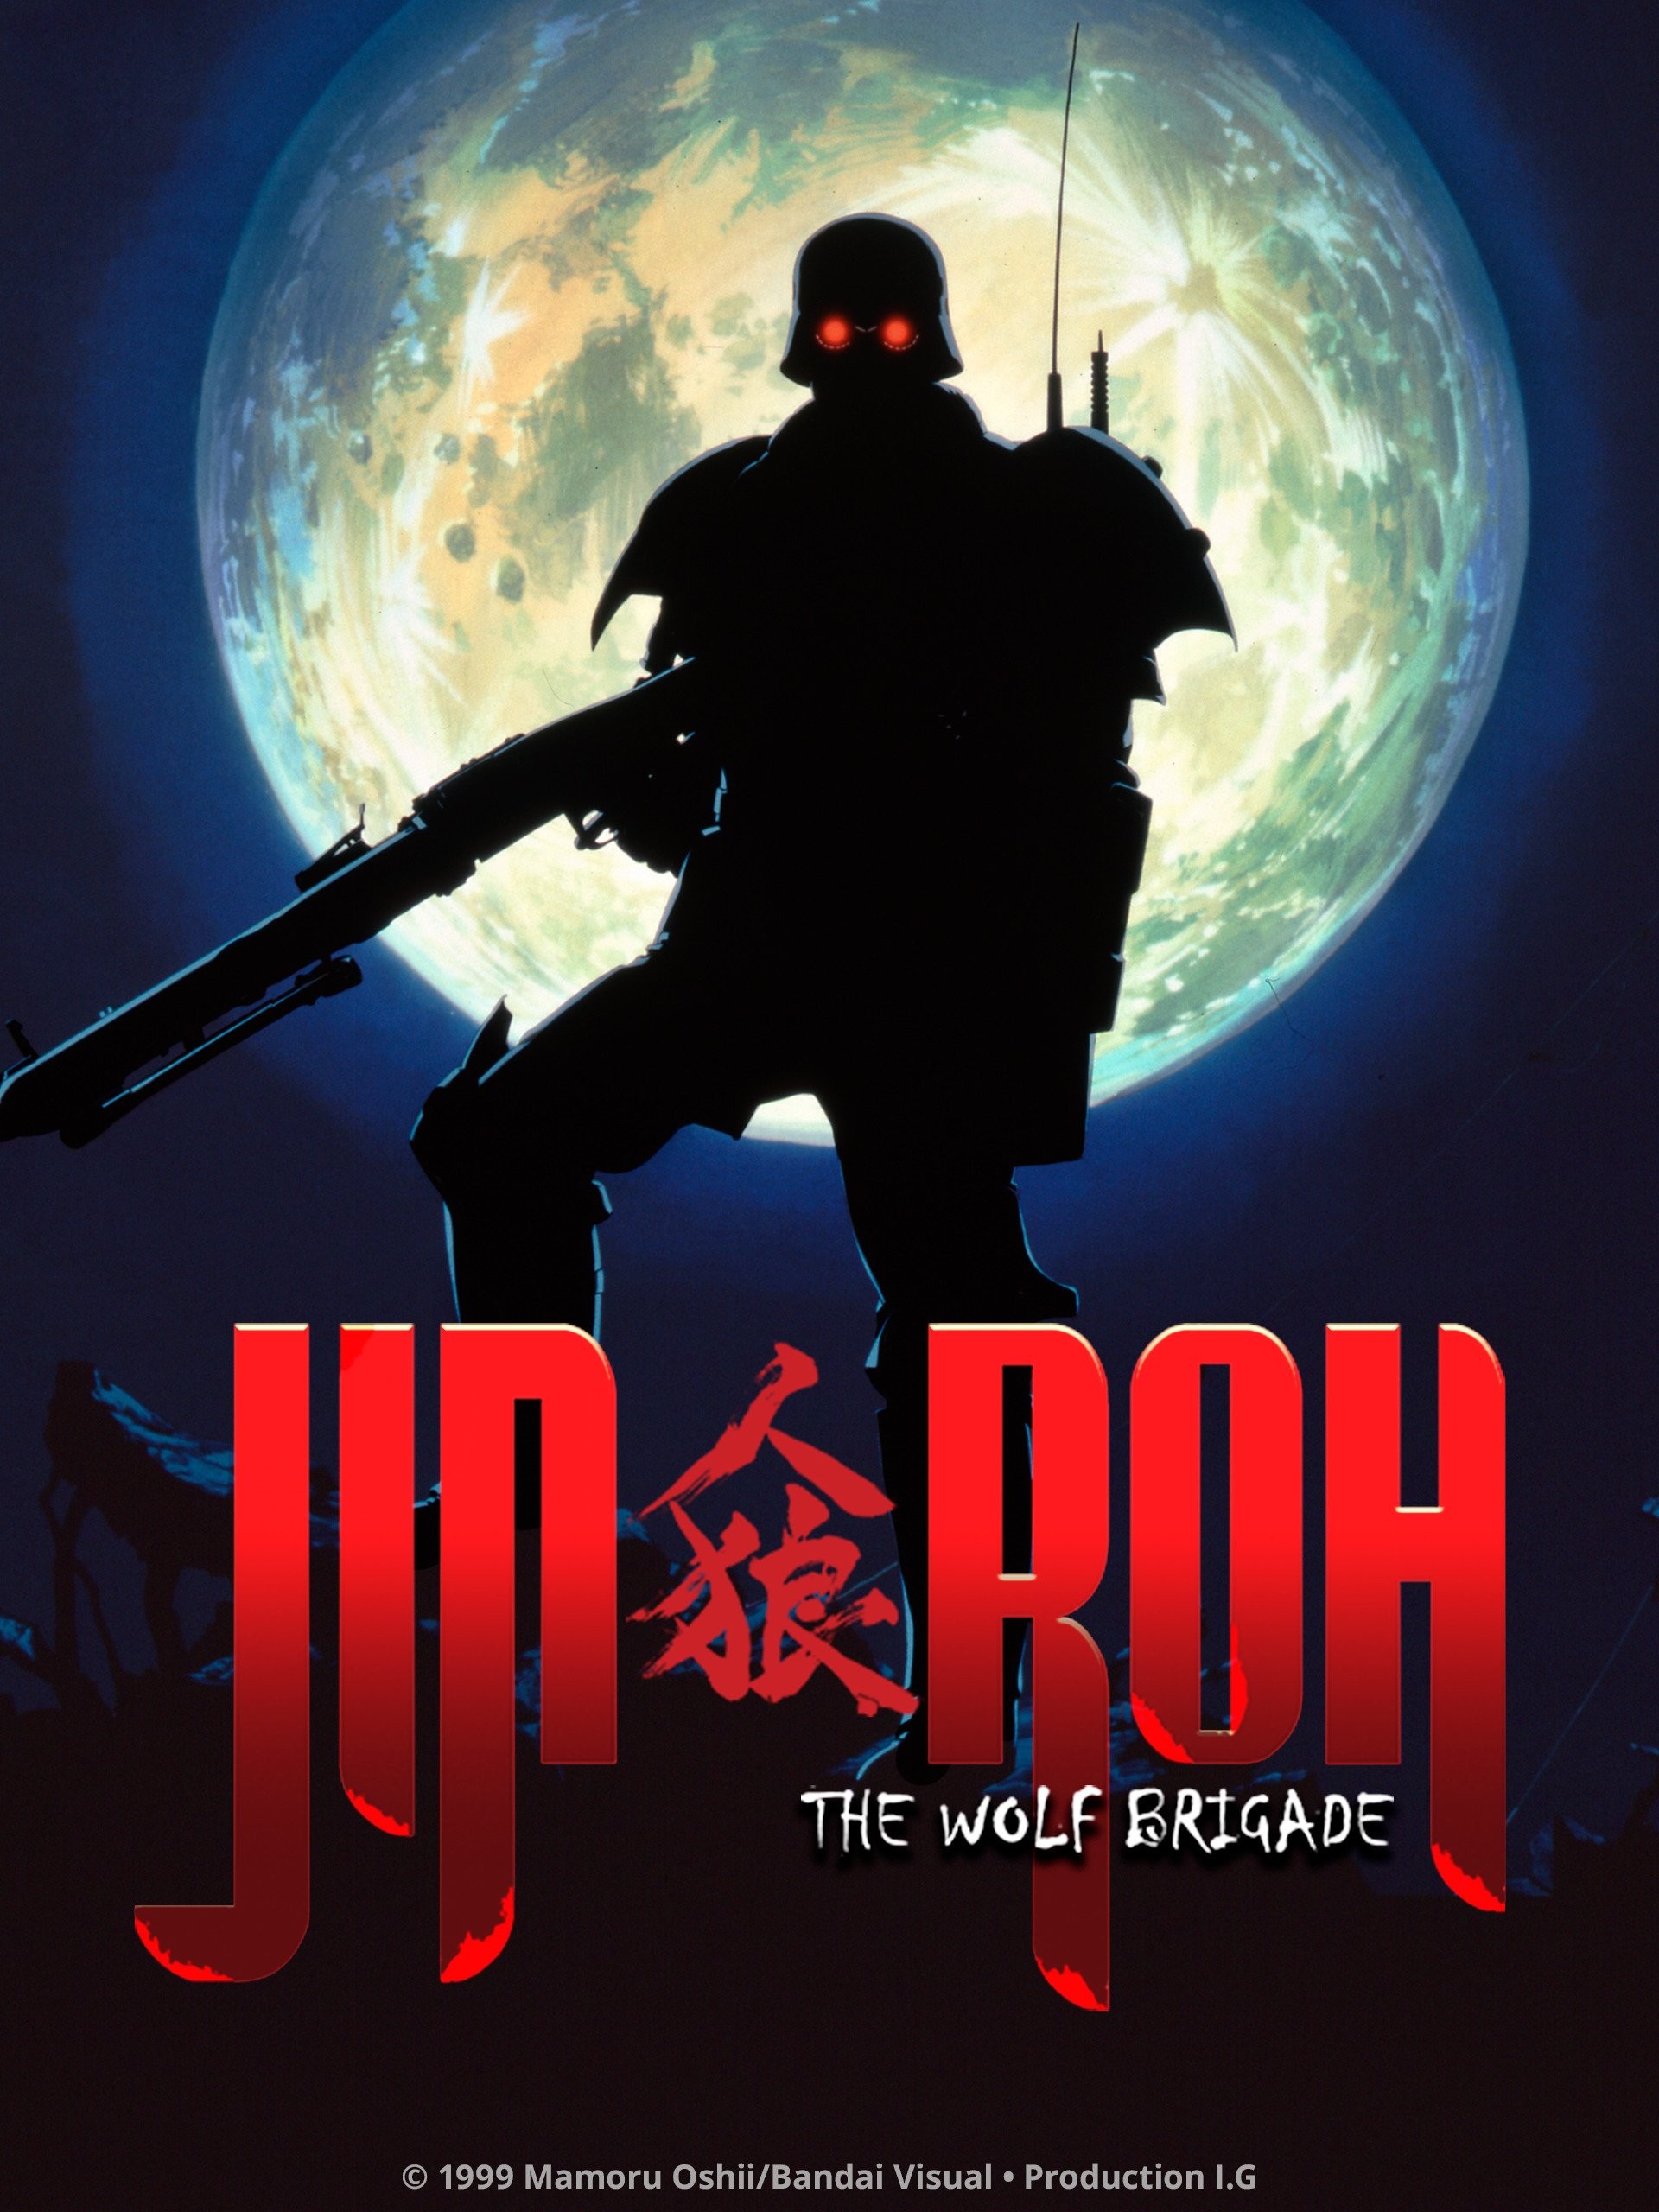 GHIBLIOTHEQUE PRESENTS... JIN-ROH: THE WOLF BRIGADE